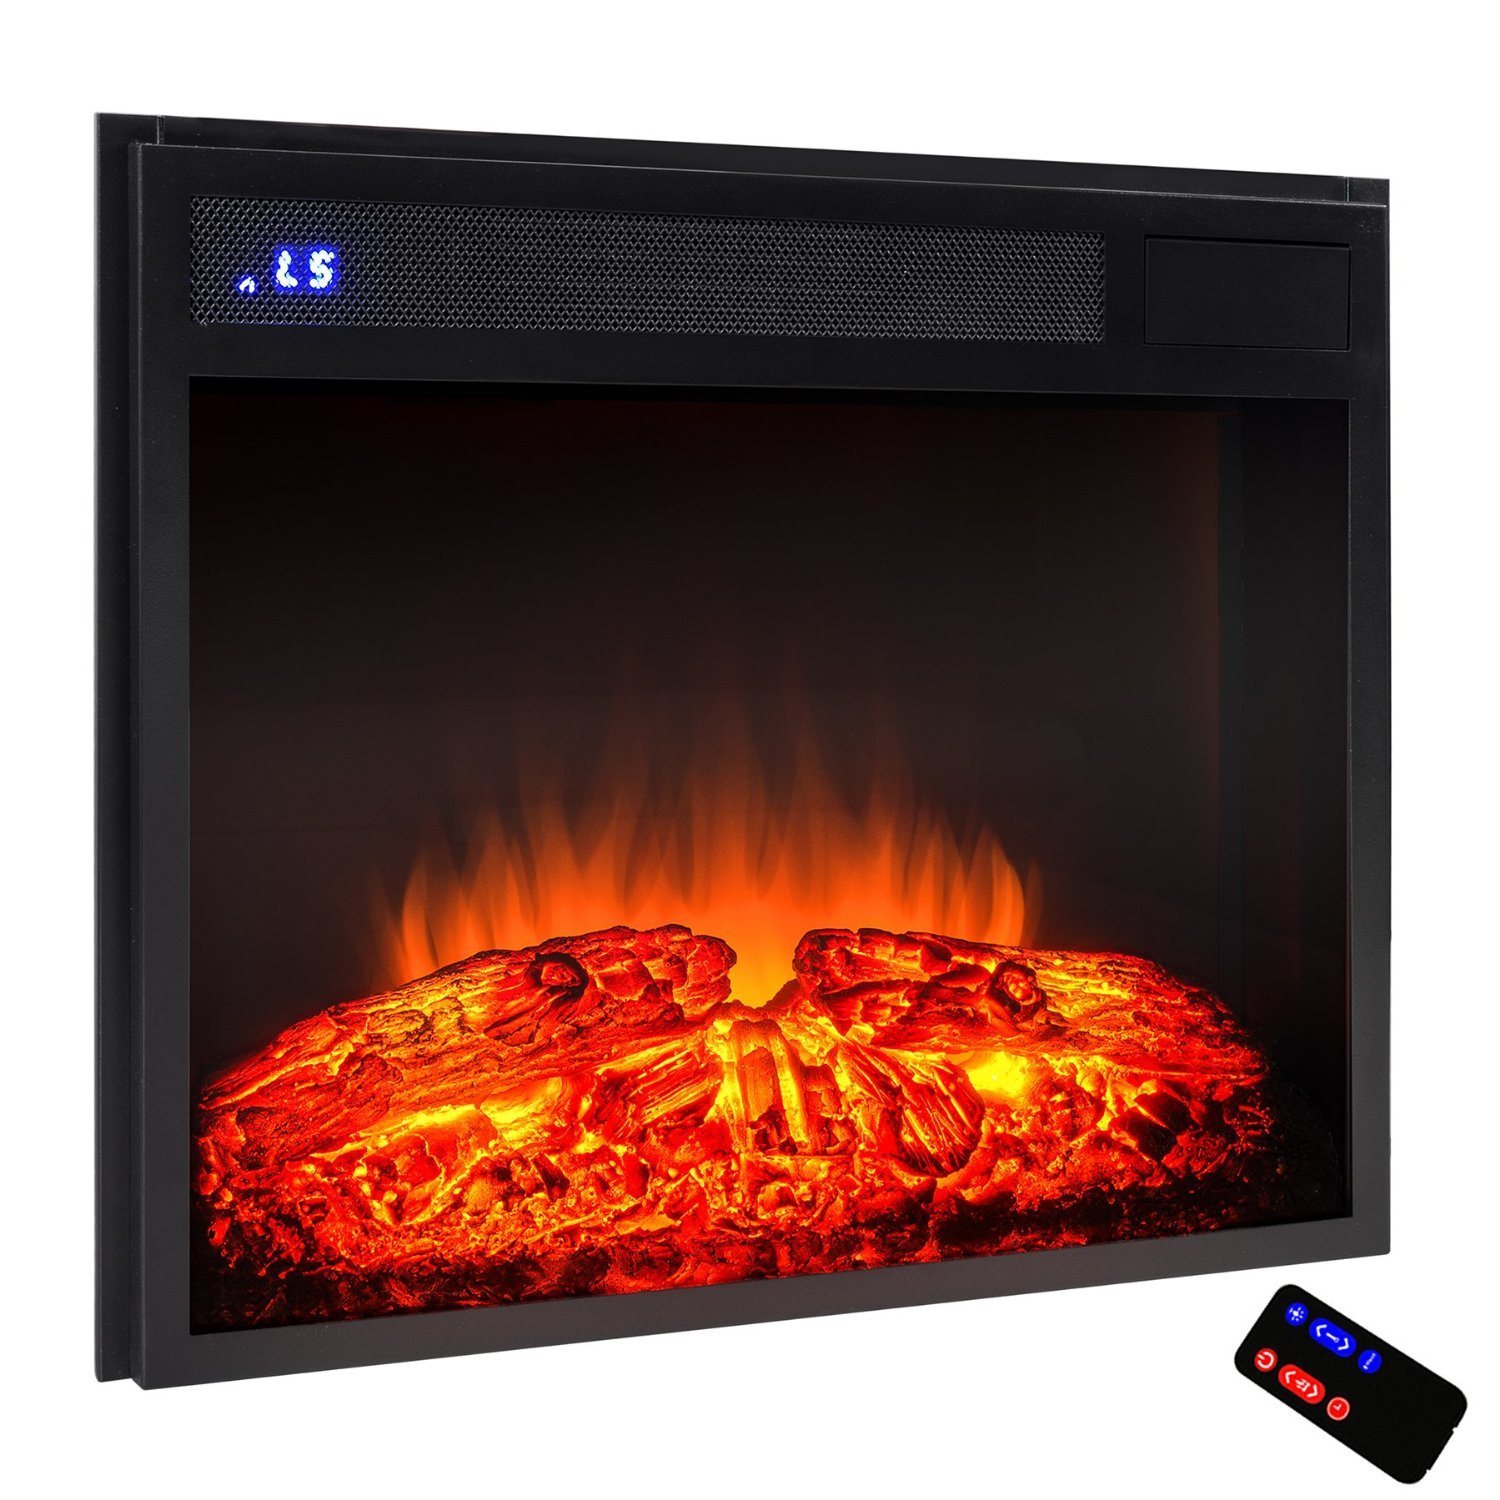 Electric Fireplace 1000 Square Feet Luxury Best Fireplace Inserts Reviews 2019 – Gas Wood Electric